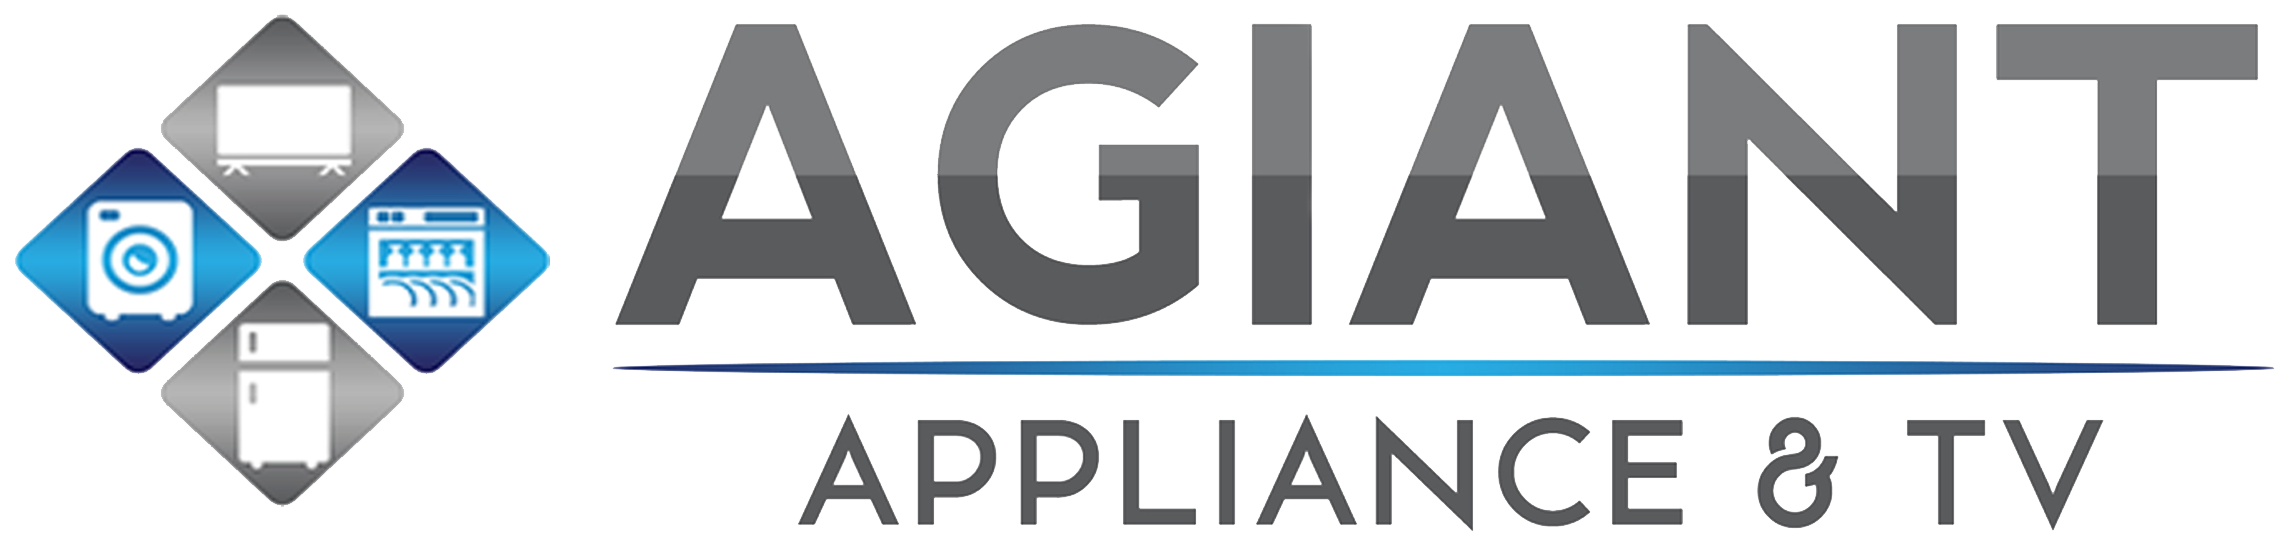 Agiant Appliance and TV logo